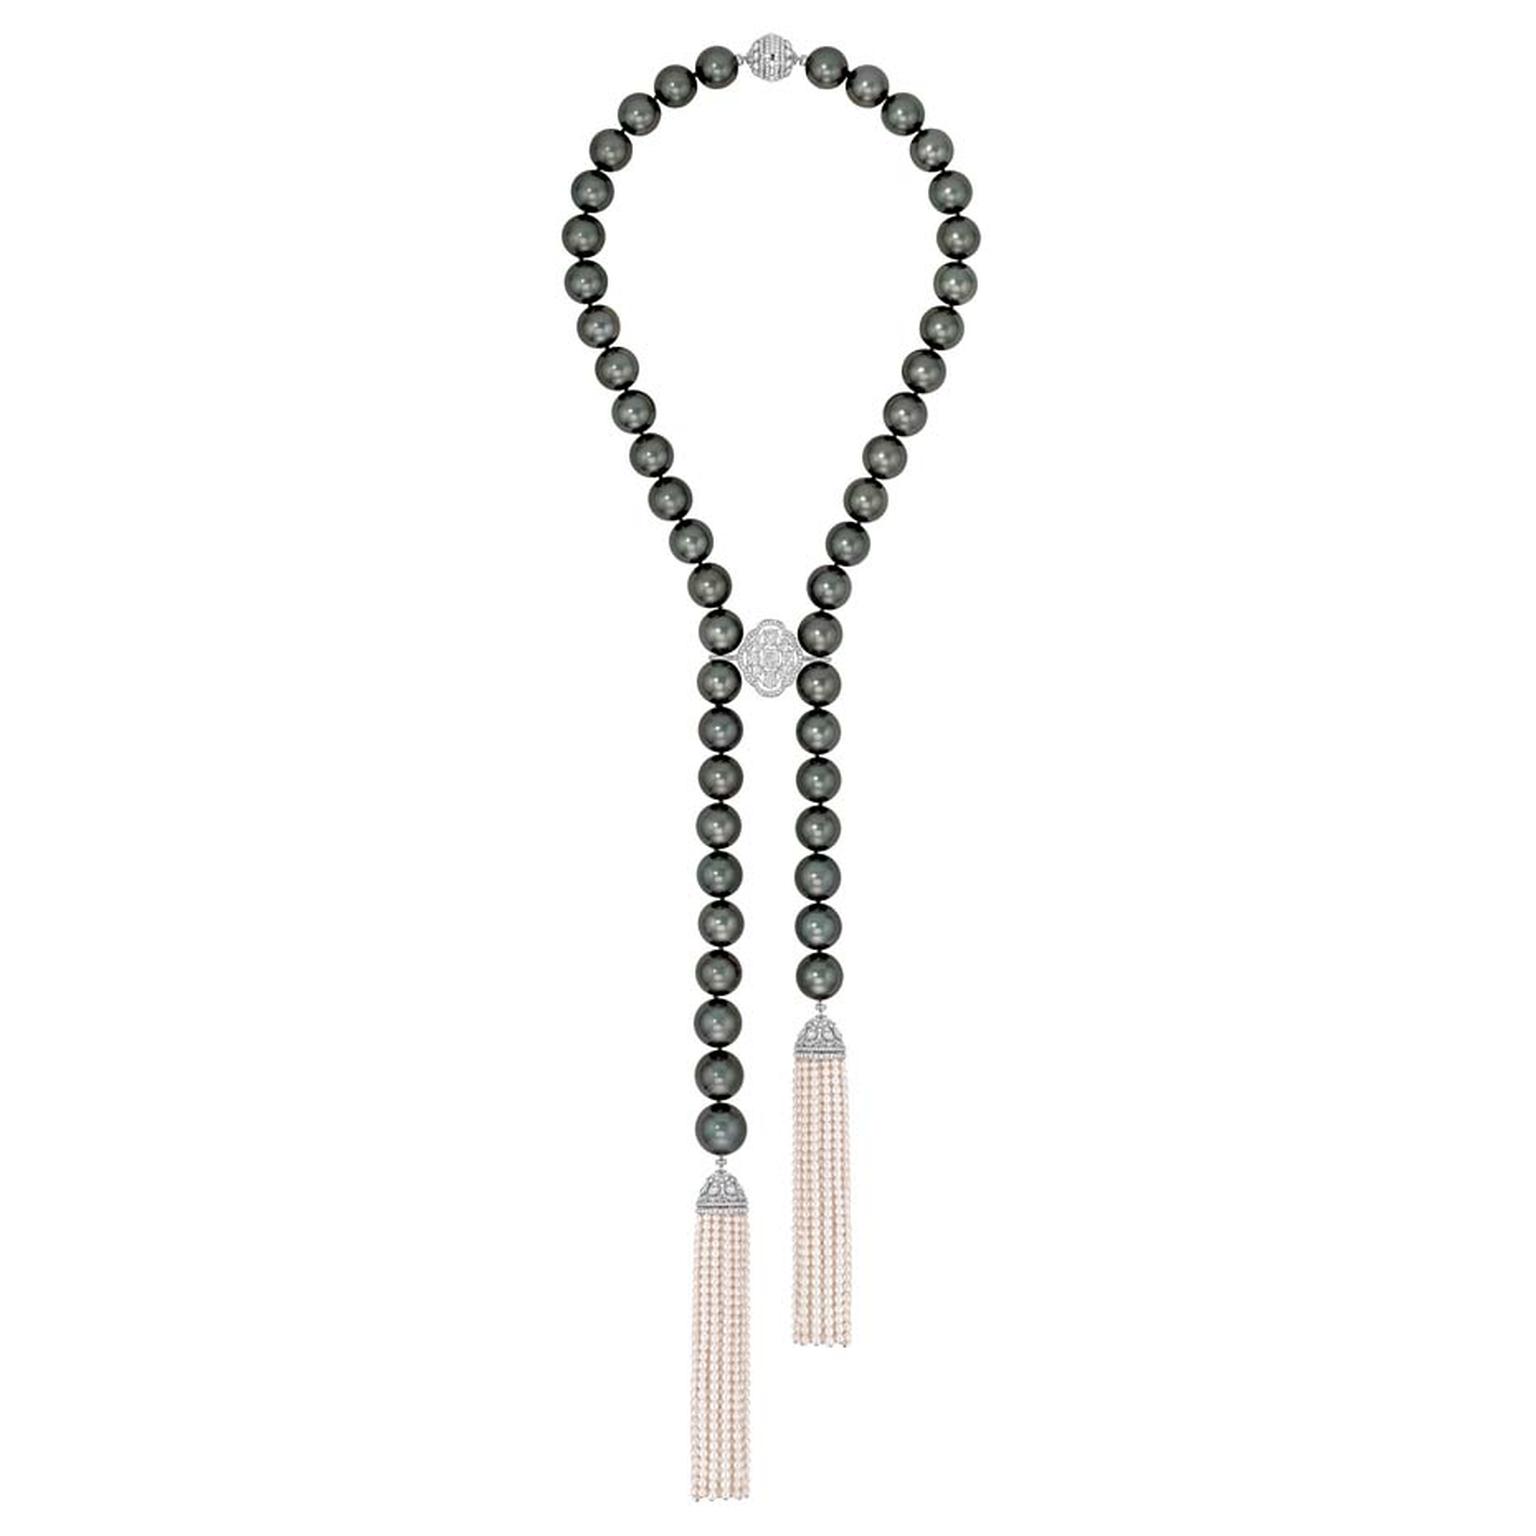 Chanel Perles de Nuit necklace, from the new Les Perles de Chanel collection